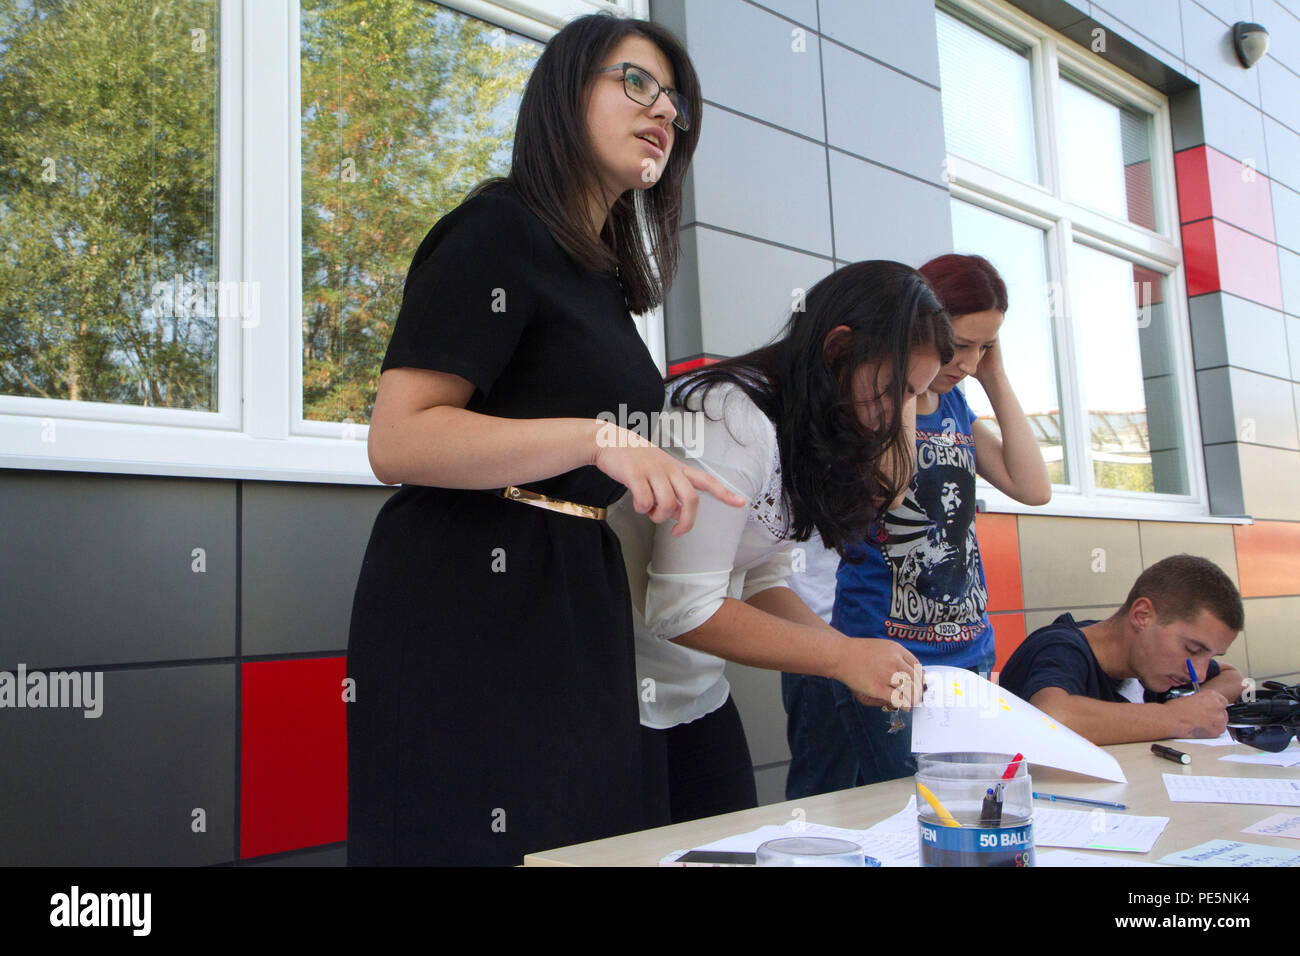 Egzona Bokshki (left), president of Rotaract Club Illyrian and a recent University of Pristina graduate, greets attendees as they sign in for a Violence Free Future workshop and Play2Educate youth event Sept. 19, 2015, in Mitrovica, Kosovo. These events, sponsored by the U.S. Embassy and led by Rotary Club Pristina, promote pro-social behaviors for young men and women in Kosovo regardless of gender or ethnic background, and aim to keep students positively engaged in school and their community. Hungarian and U.S. soldiers assigned to Multinational Battle Group-East attended the event as volunte Stock Photo